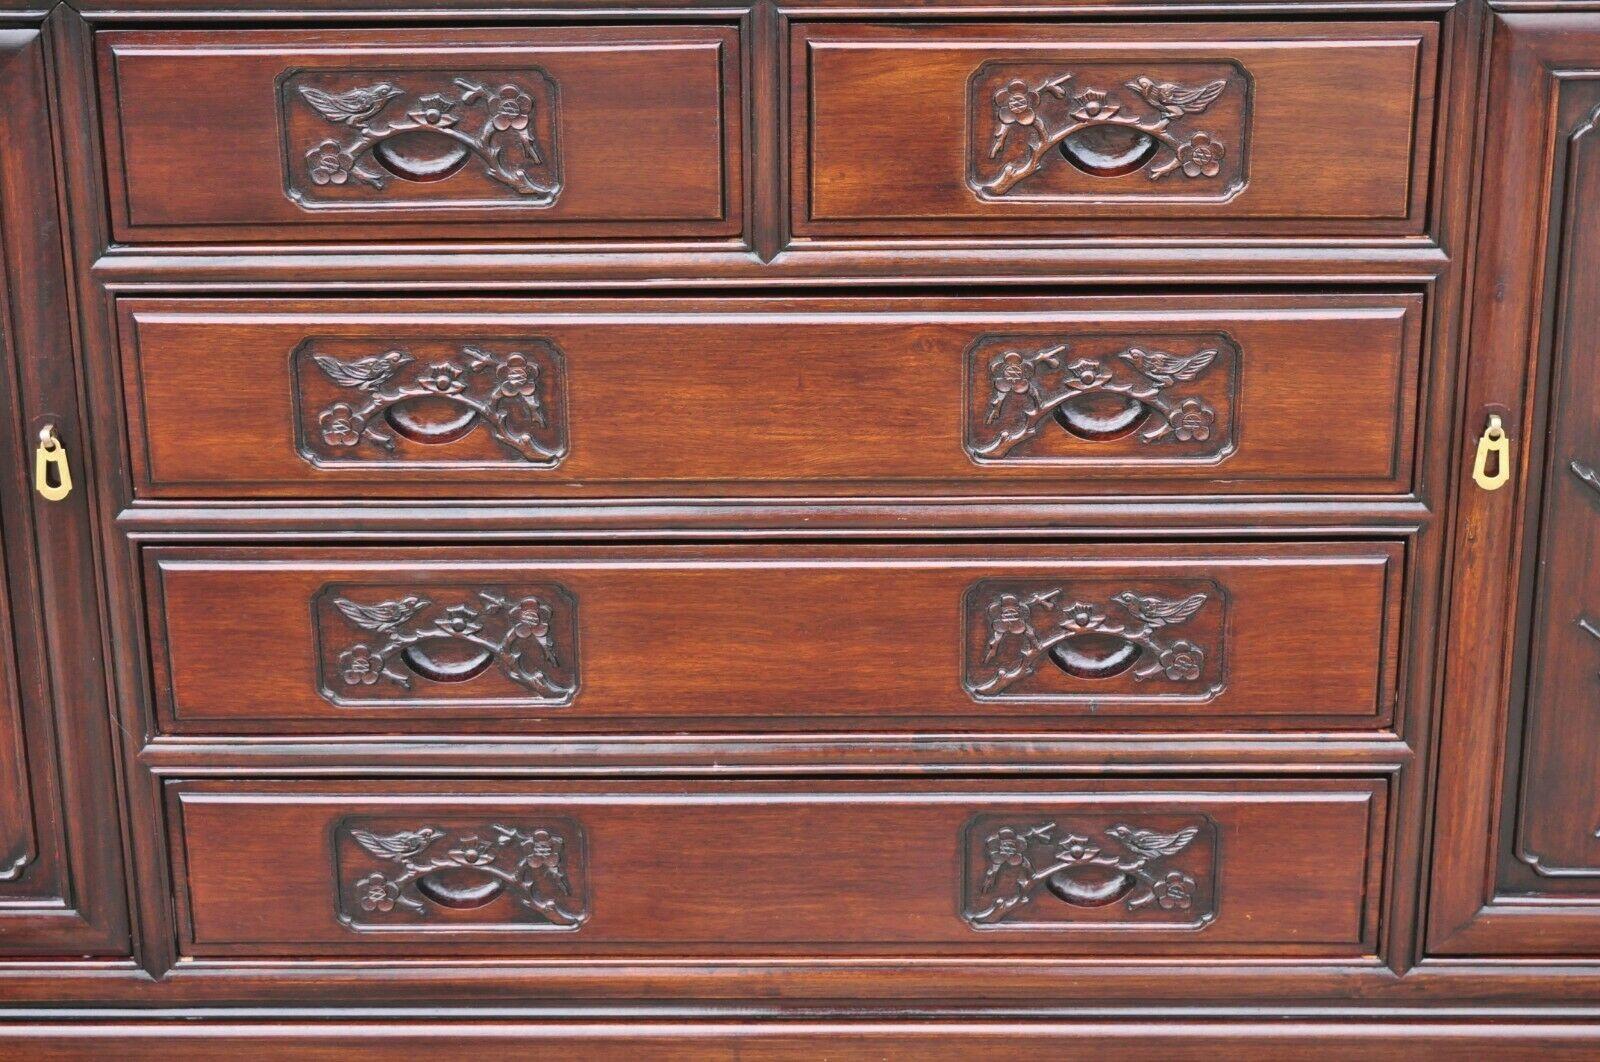 Chinese Export Vintage Chinese Bird Carved Mahogany Hardwood Buffet Sideboard Server Credenza